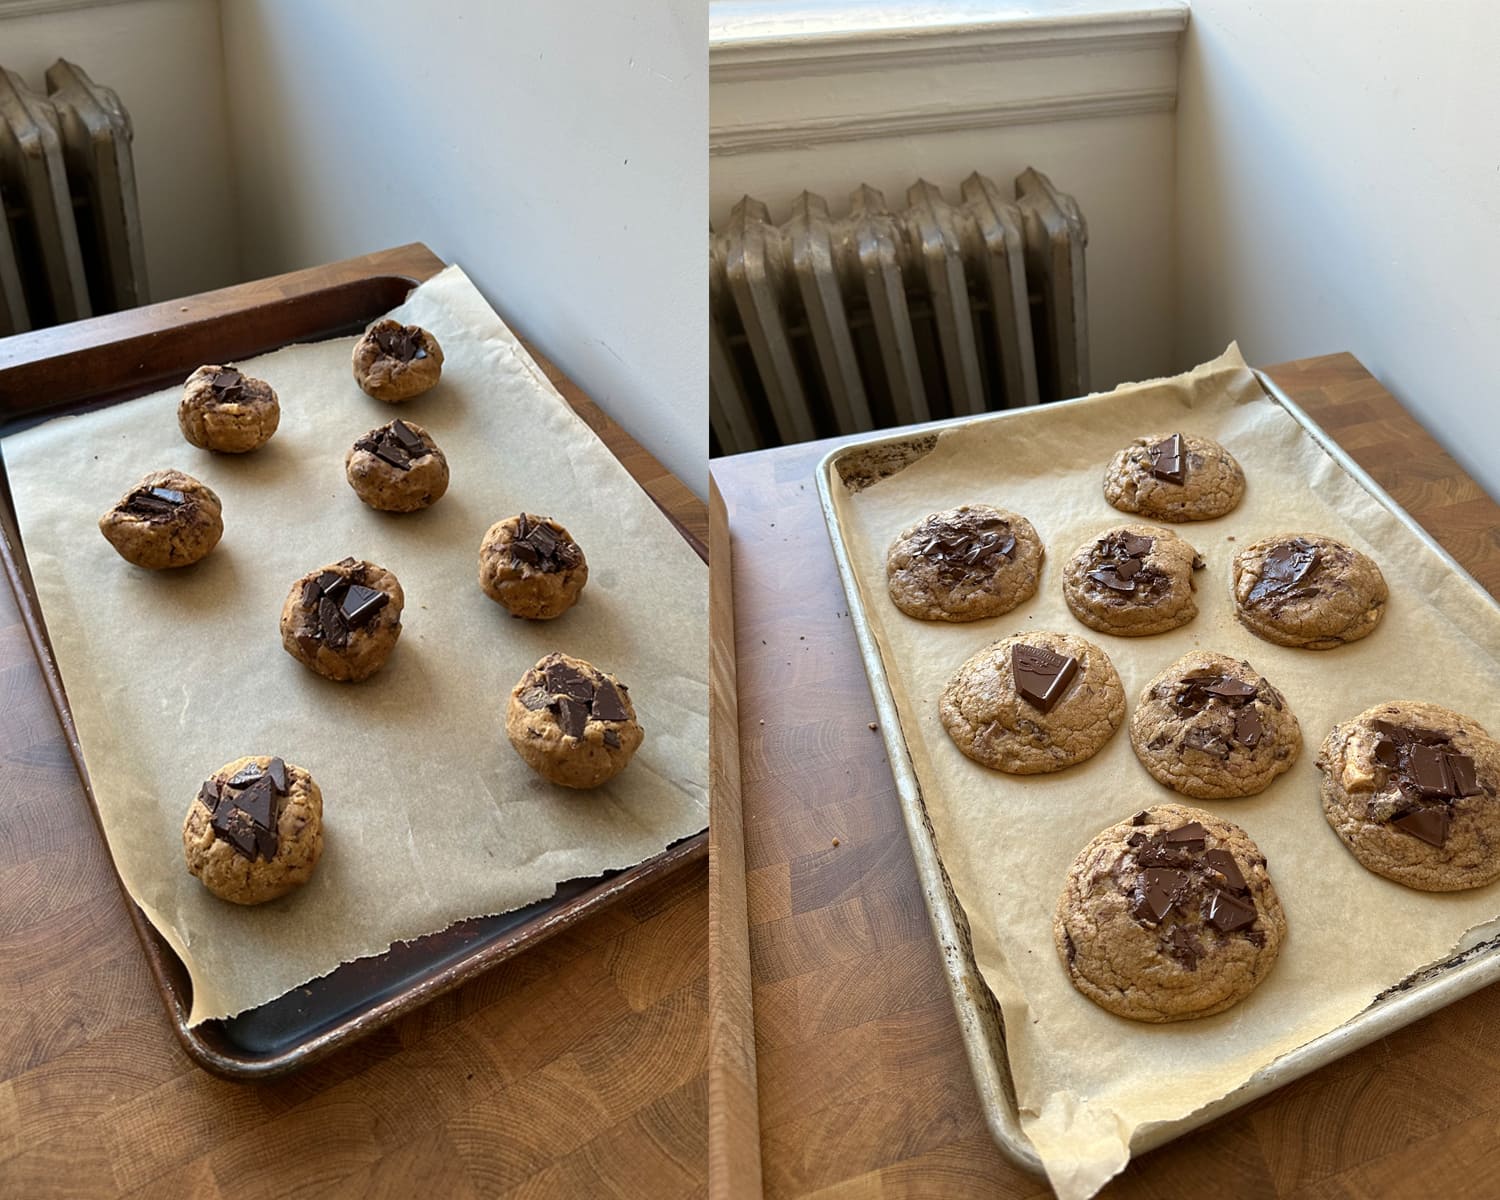 Chocolate chip cookies chilled and prepped on a baking sheet before and after baking.